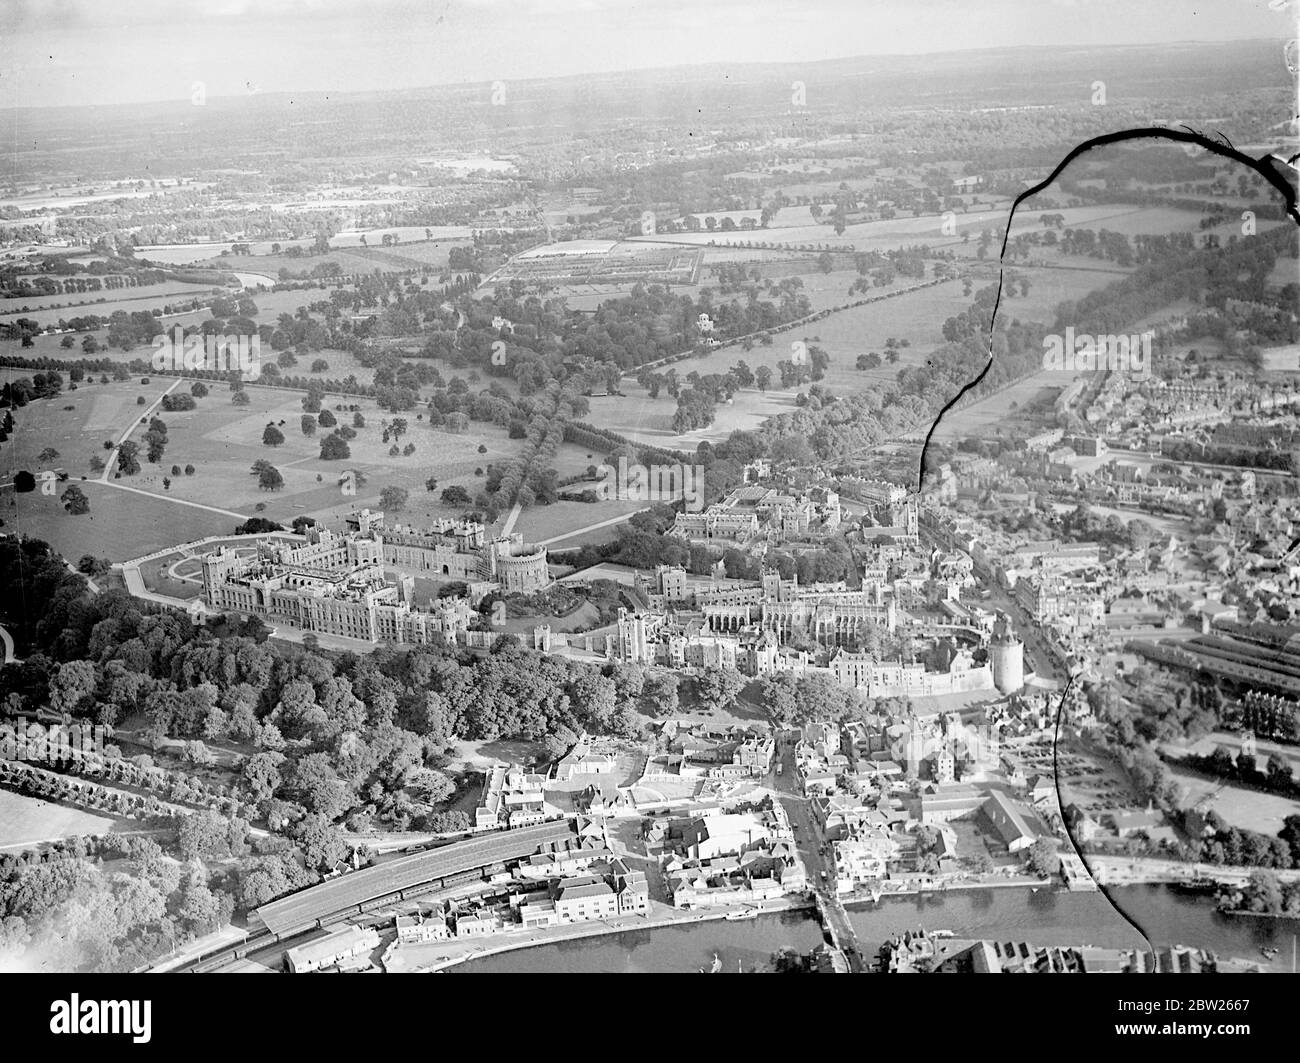 Windsor Castle, home of England's kings for 1000 years., Photos show a picture from the air. 6 August 1938 Stock Photo